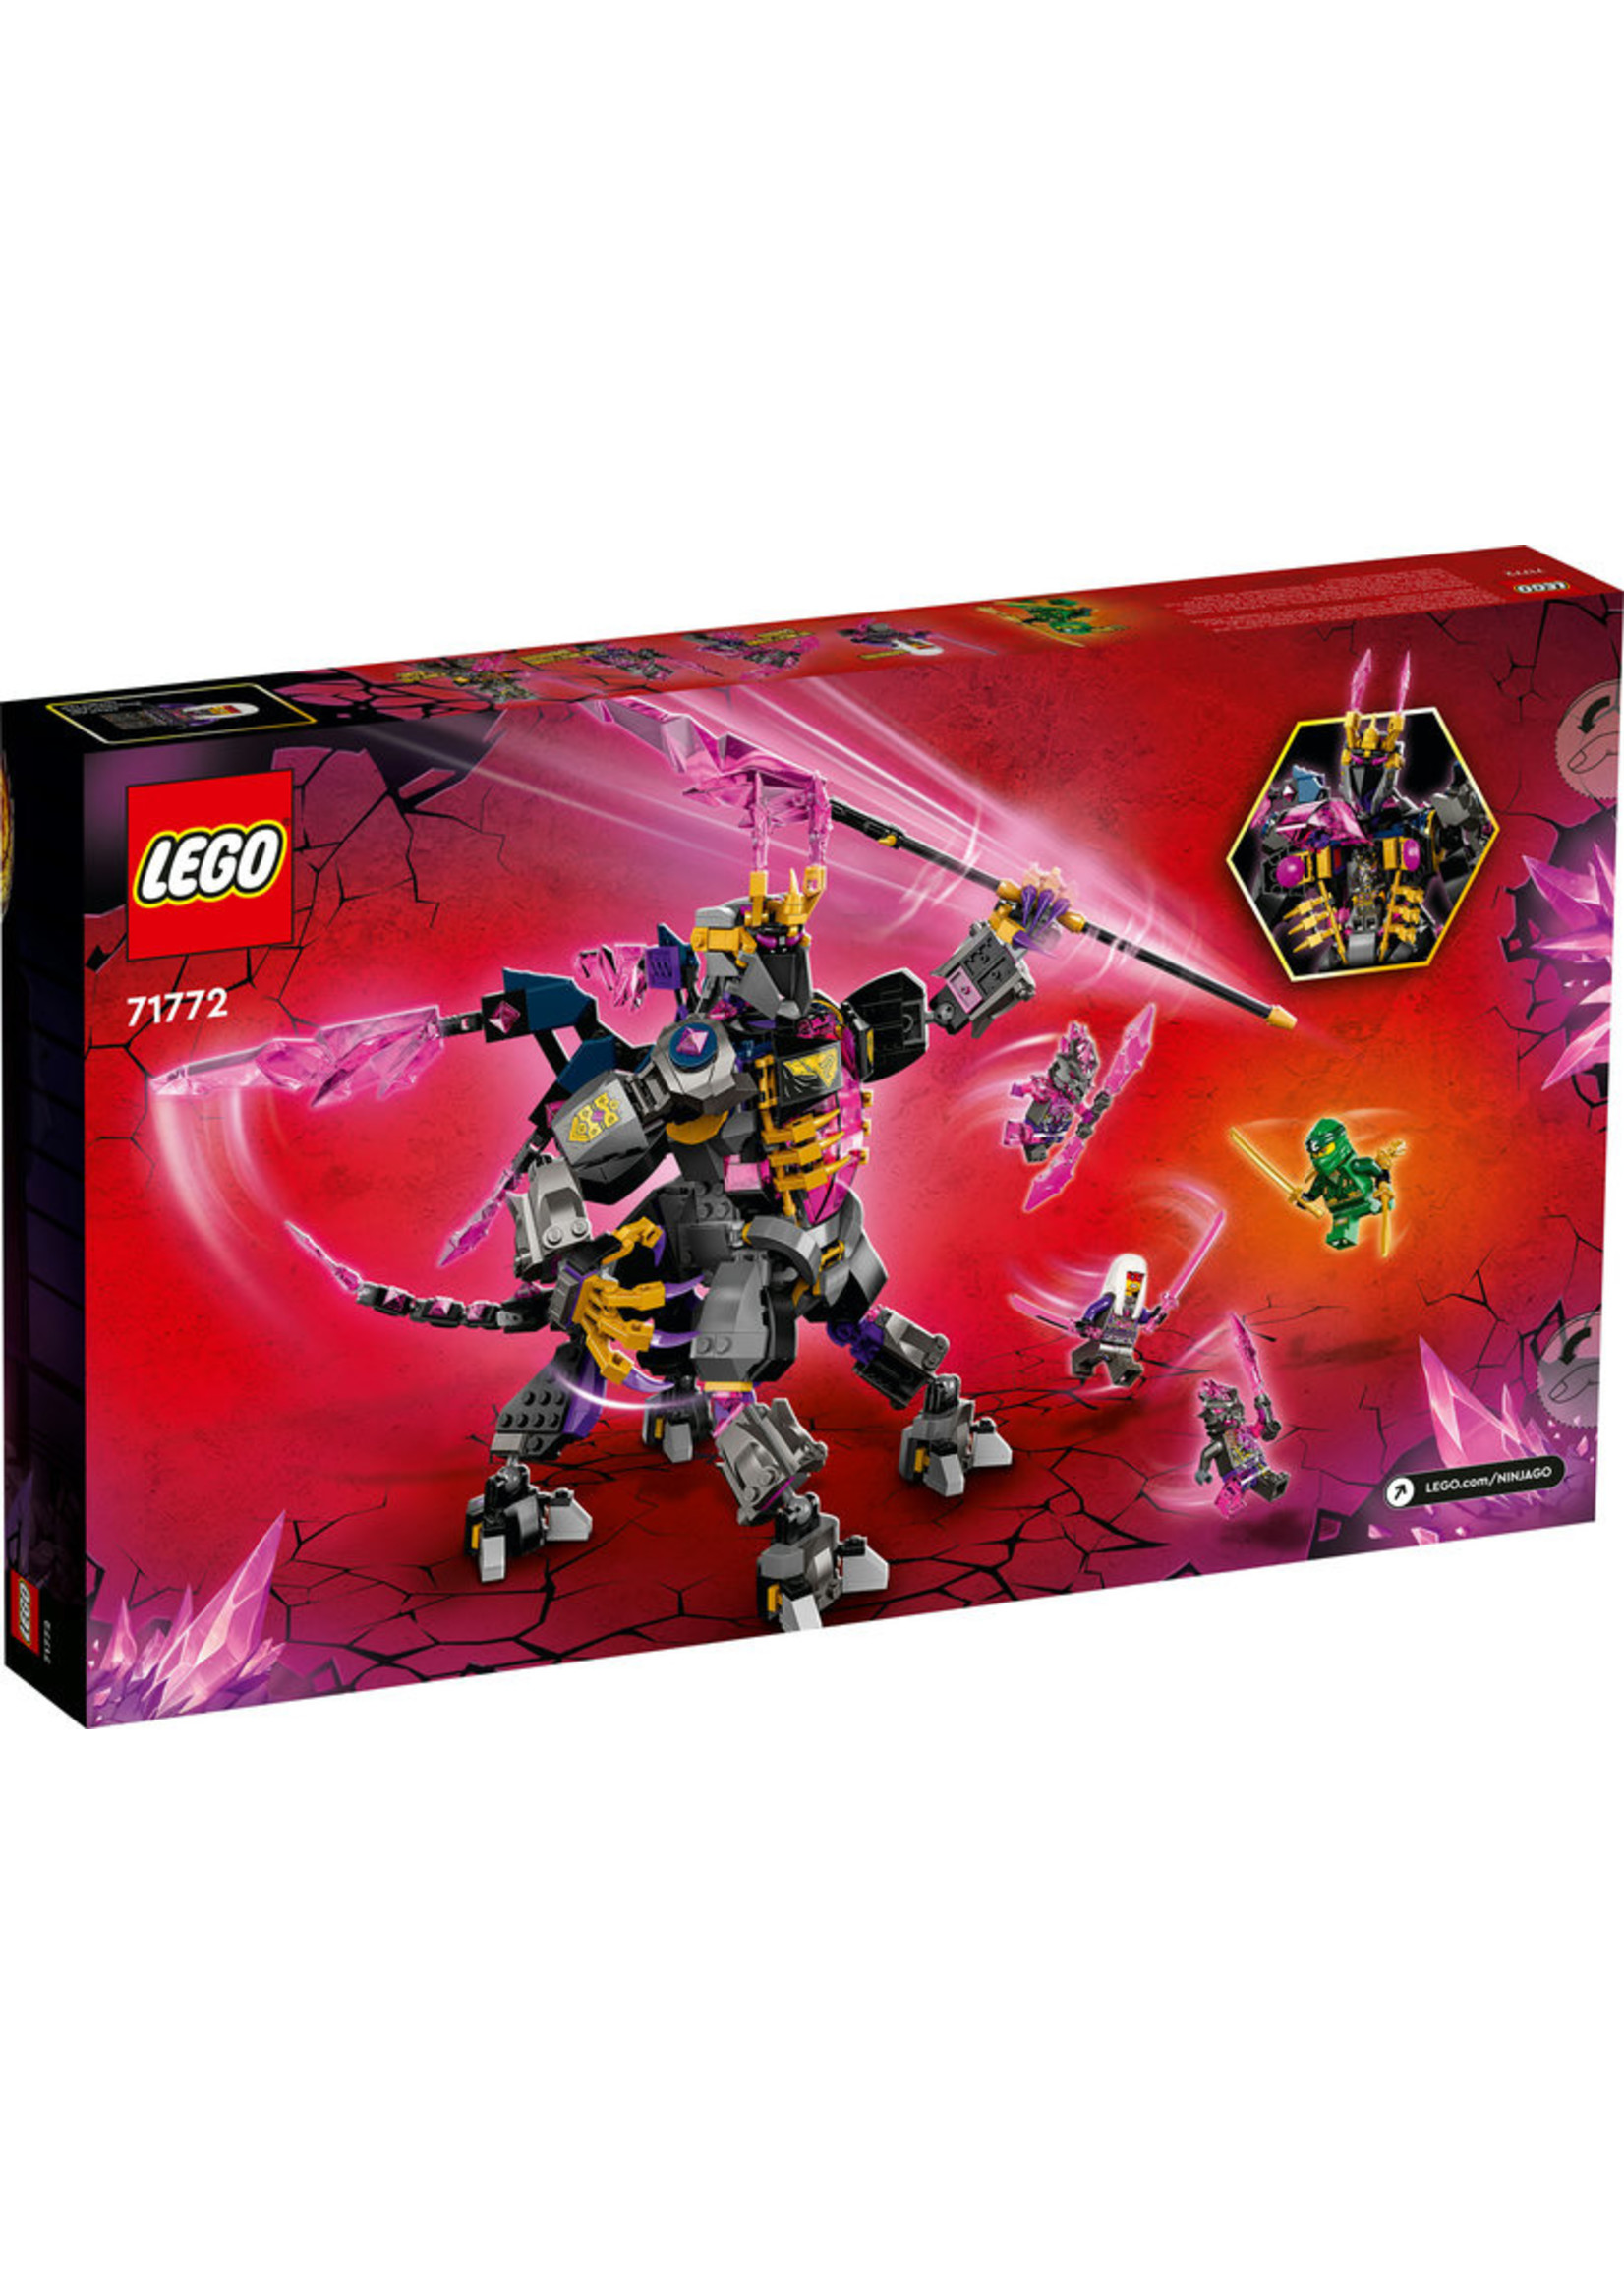 LEGO 71772 - The Crystal King